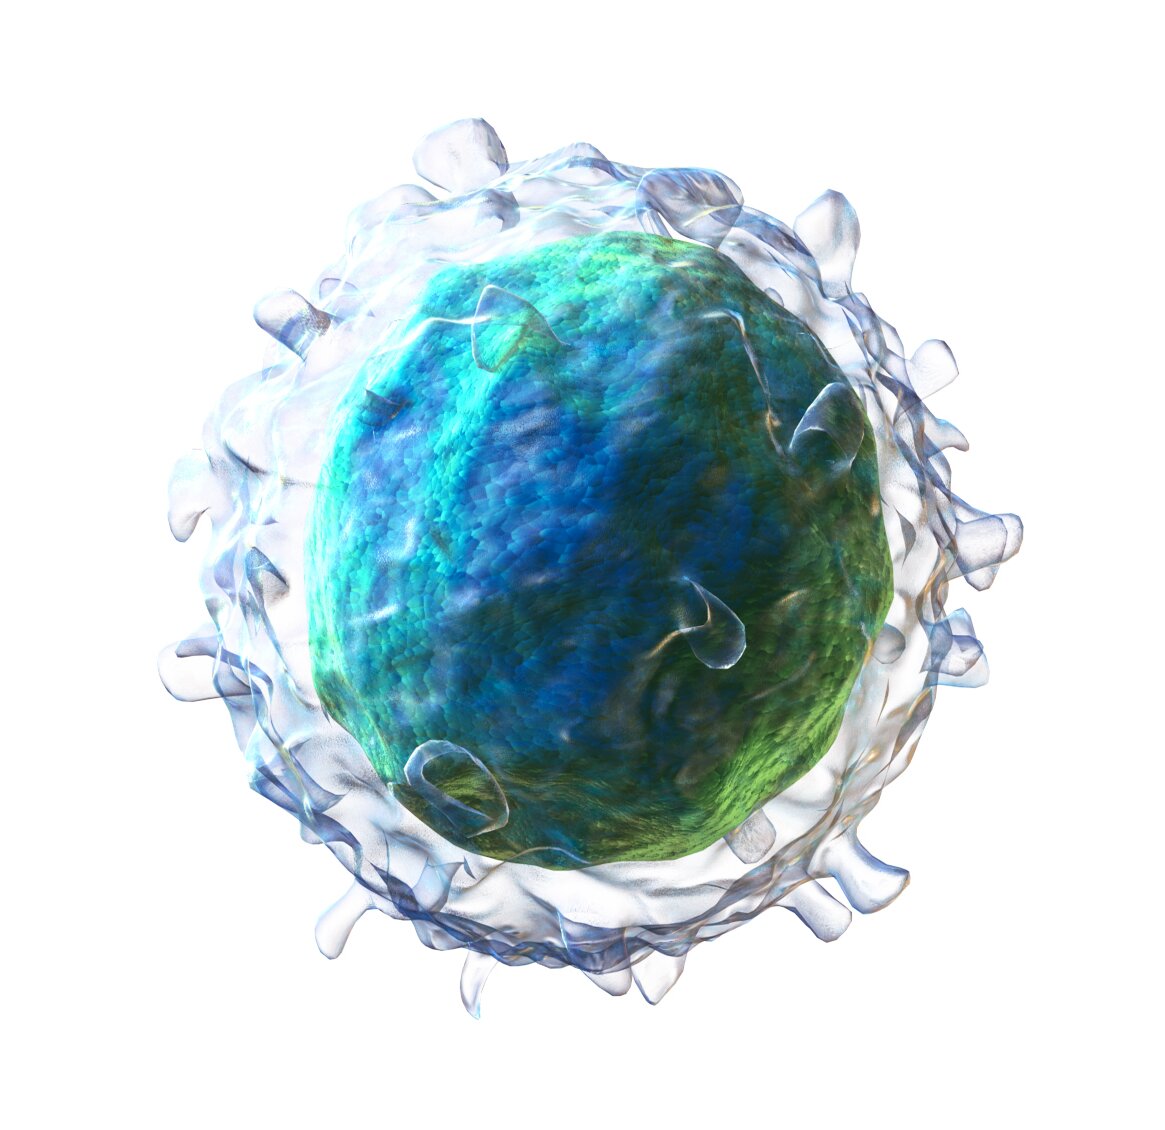 Research shows B cells can help fight infection, speed skin wound healing, and p..